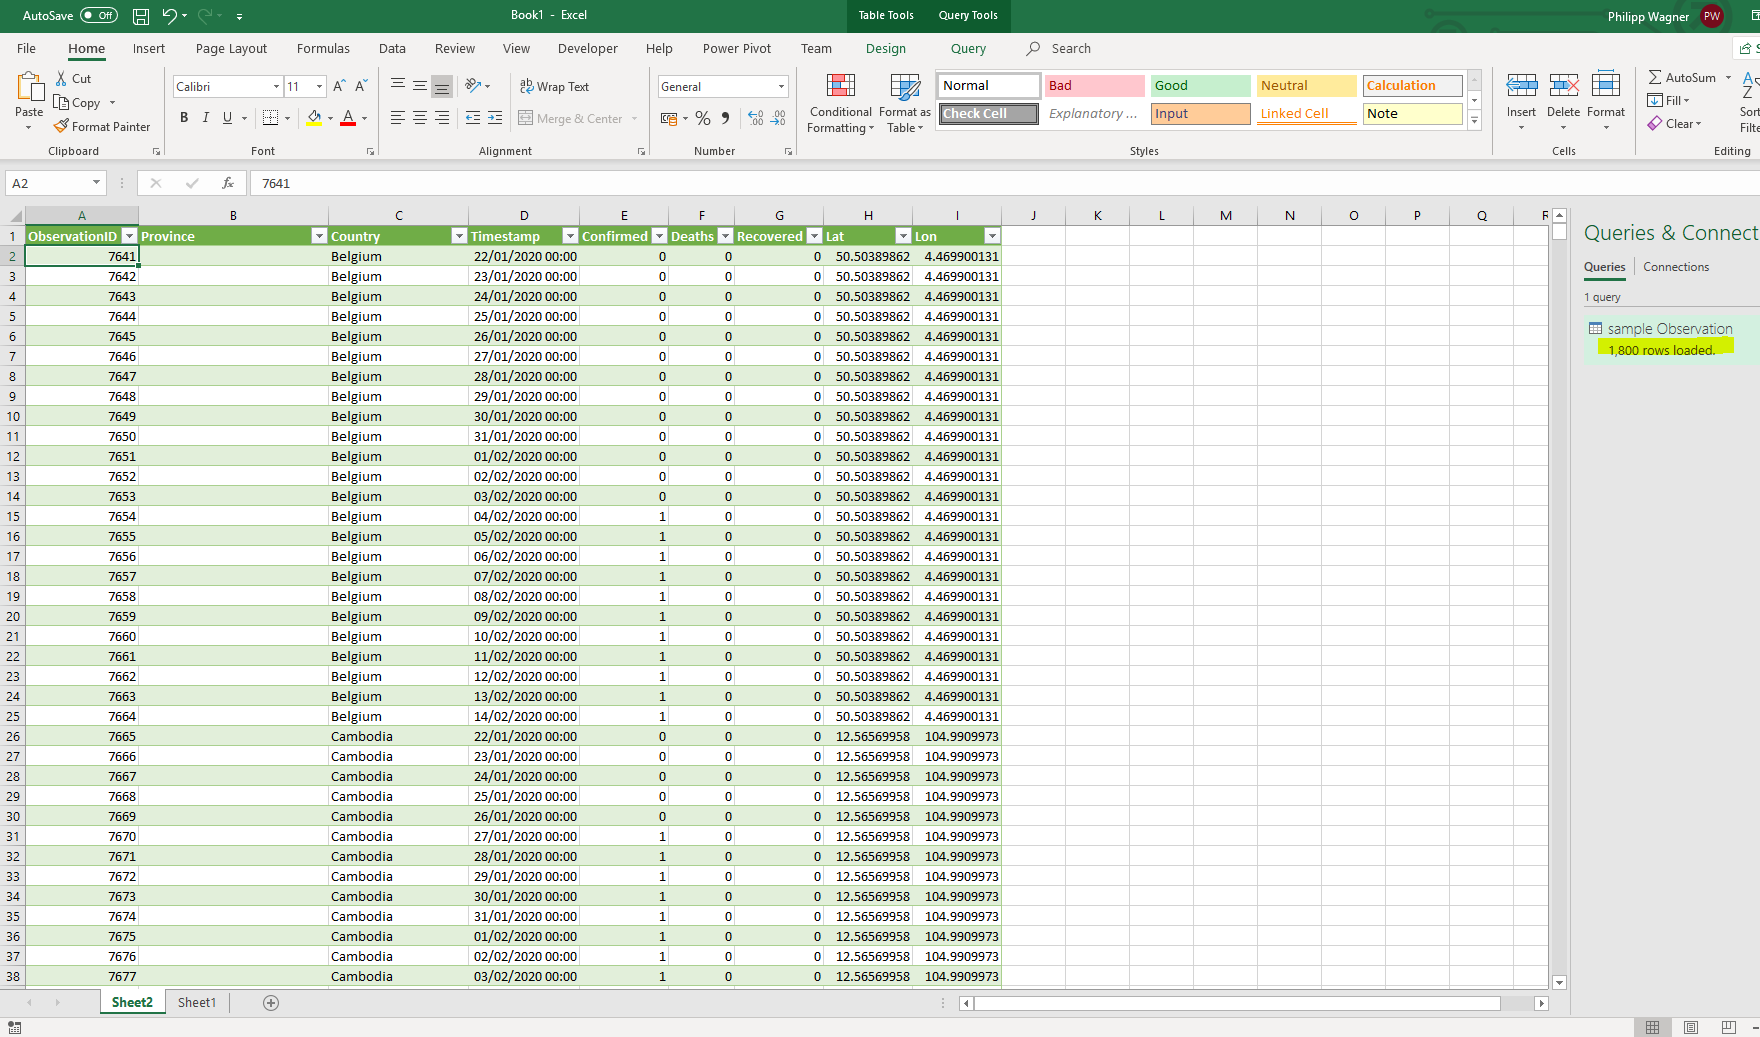 The loaded Observation data in an Excel Sheet